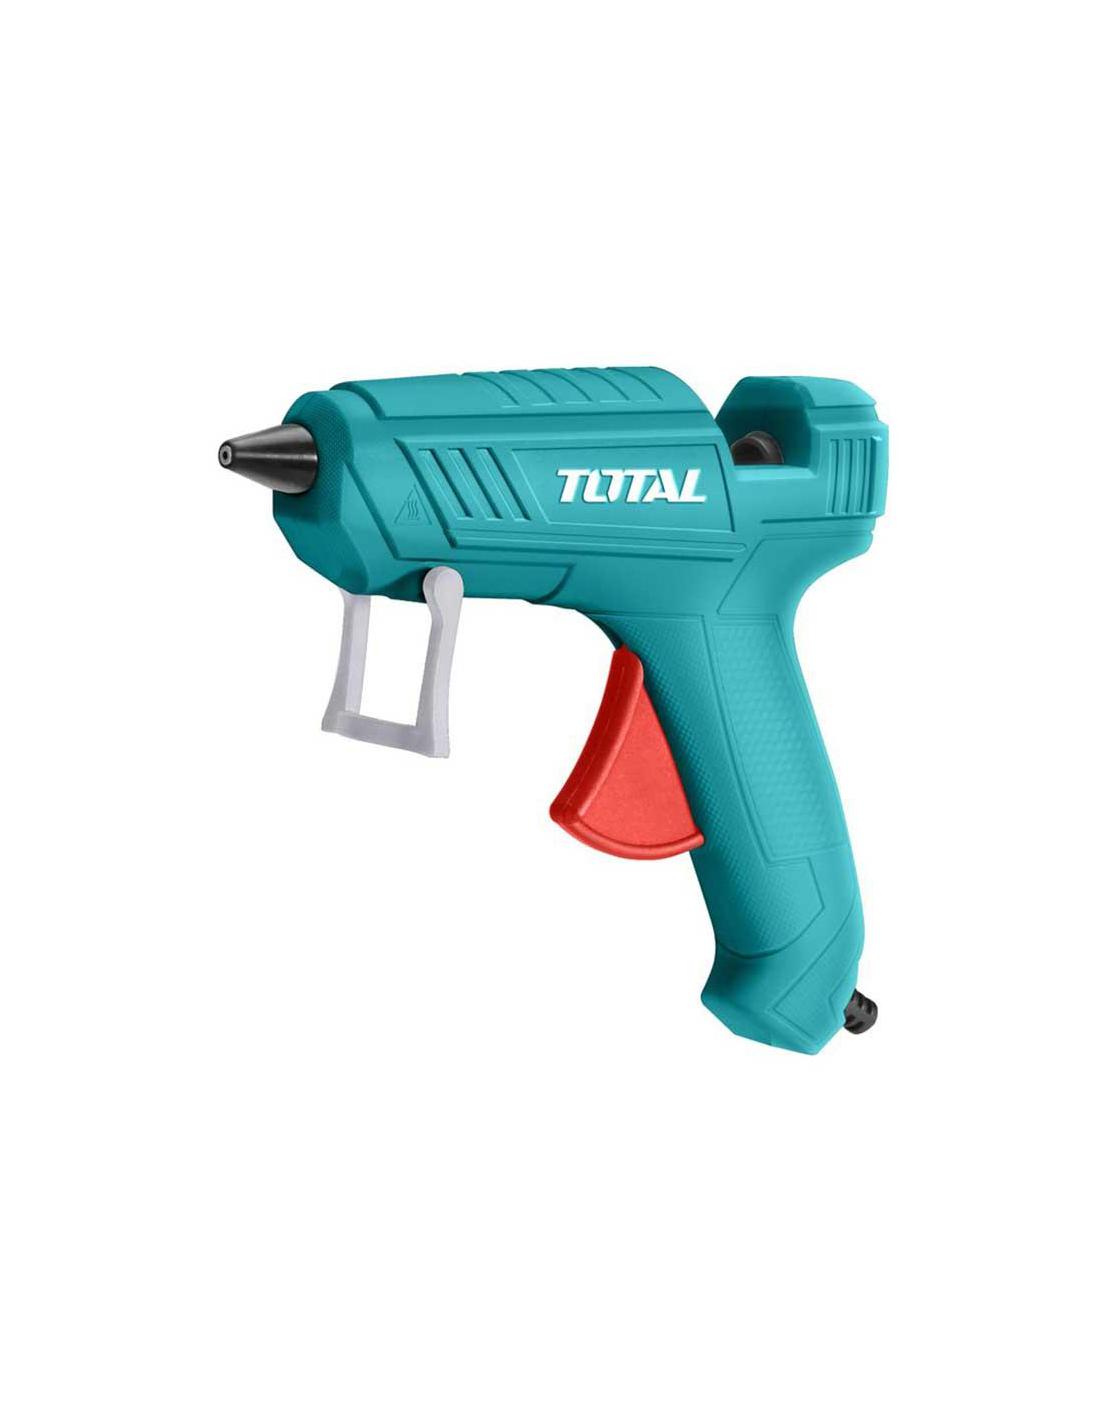 https://microcell.ma/wp-content/uploads/2022/11/pistolet-a-colle-100w-total.jpg